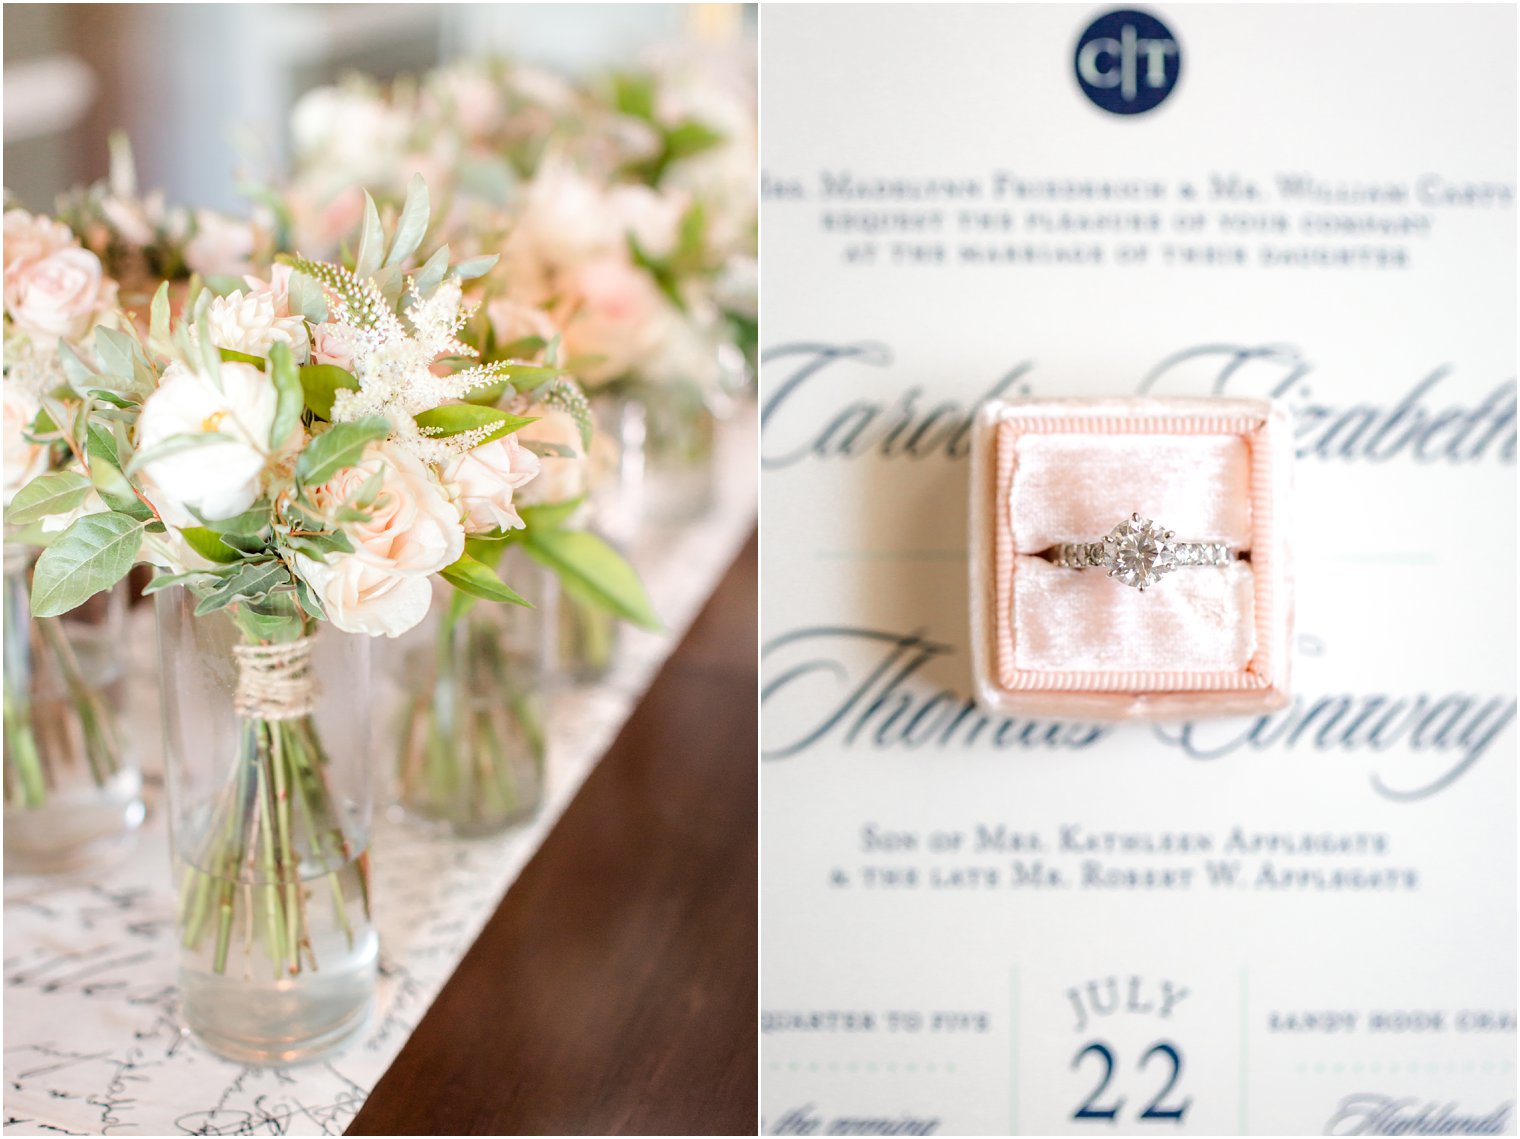 Peach and navy details at Sandy Hook Wedding